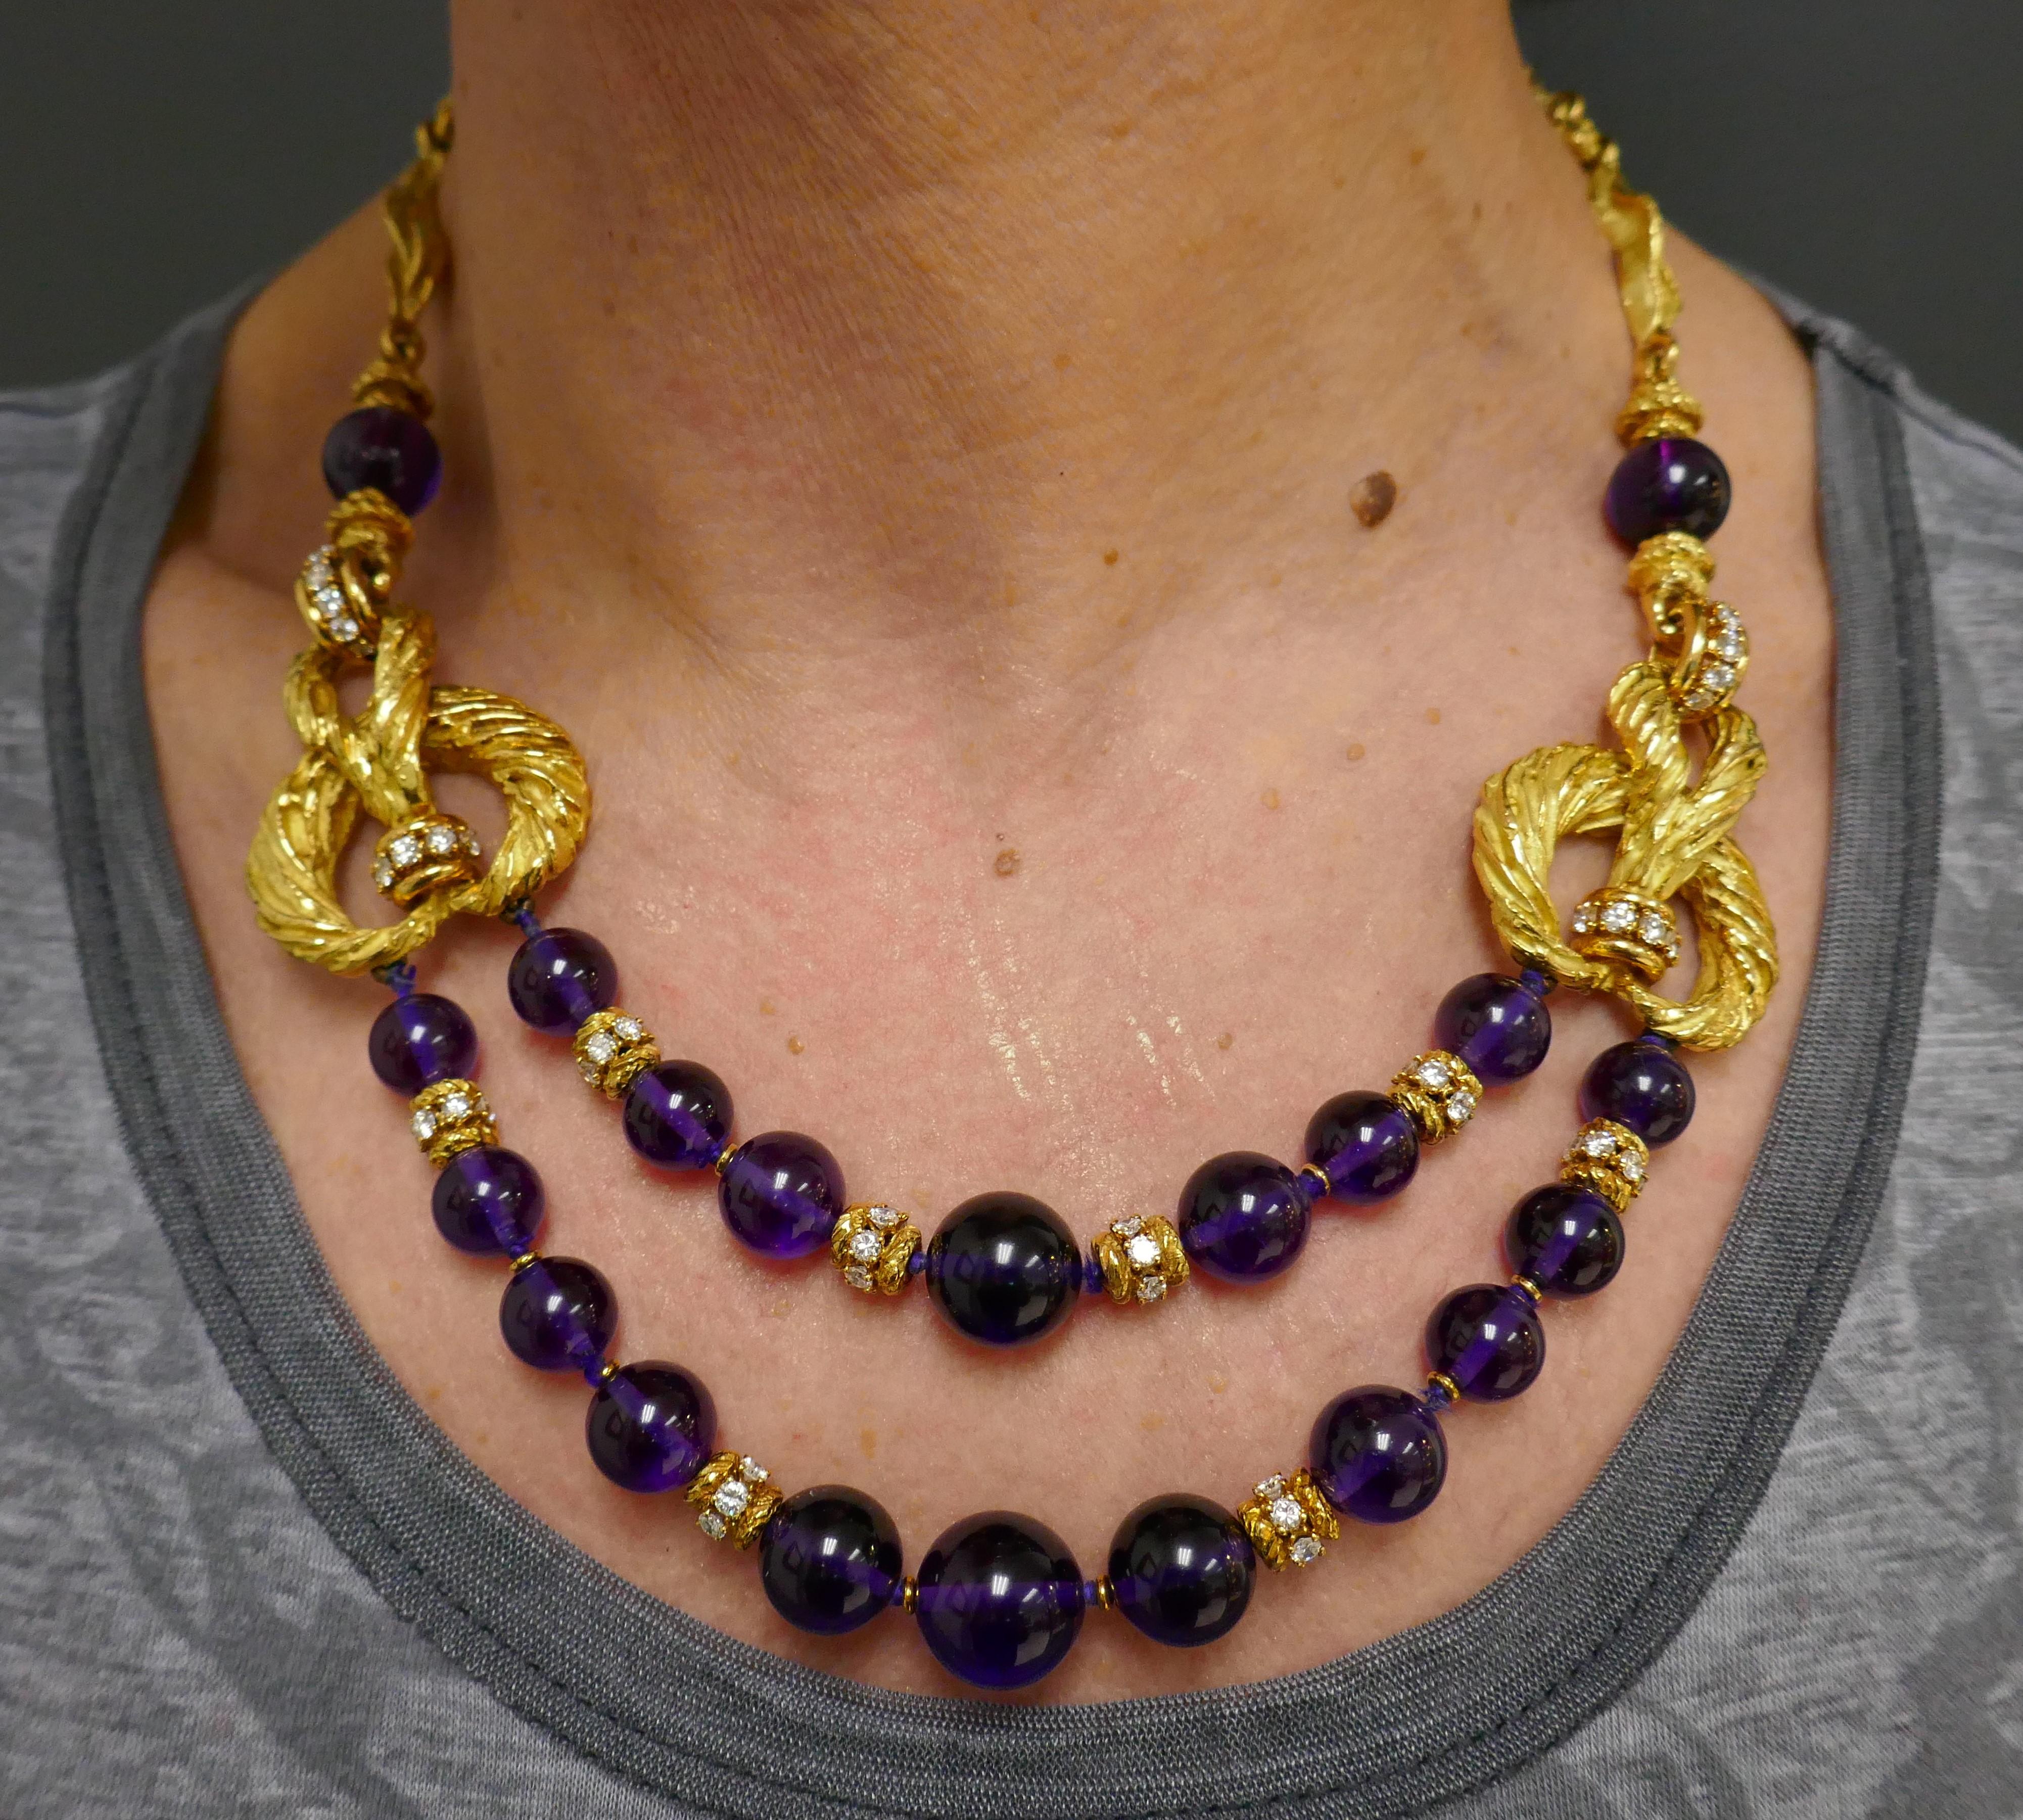 A spectacular vintage set by Chaumet, made of 18k gold, featuring amethyst and diamond. The set consists of a beaded necklace and a pair of earrings. 
The necklace has an intricate design that includes textured gold elements, diamond rondelles, and